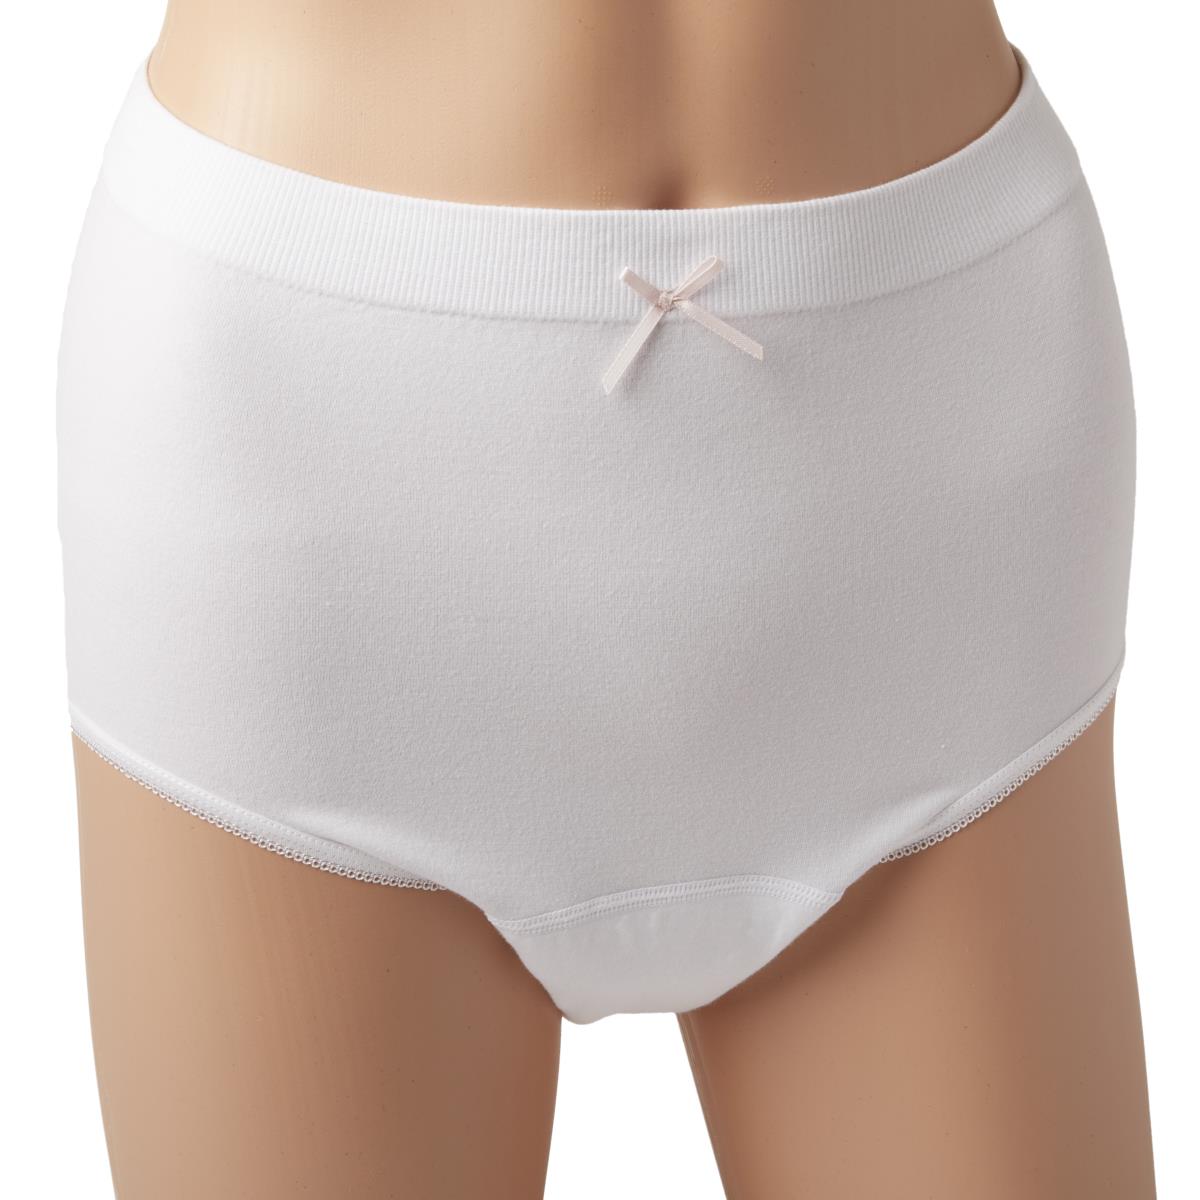 Female Incontinence Pants for Women